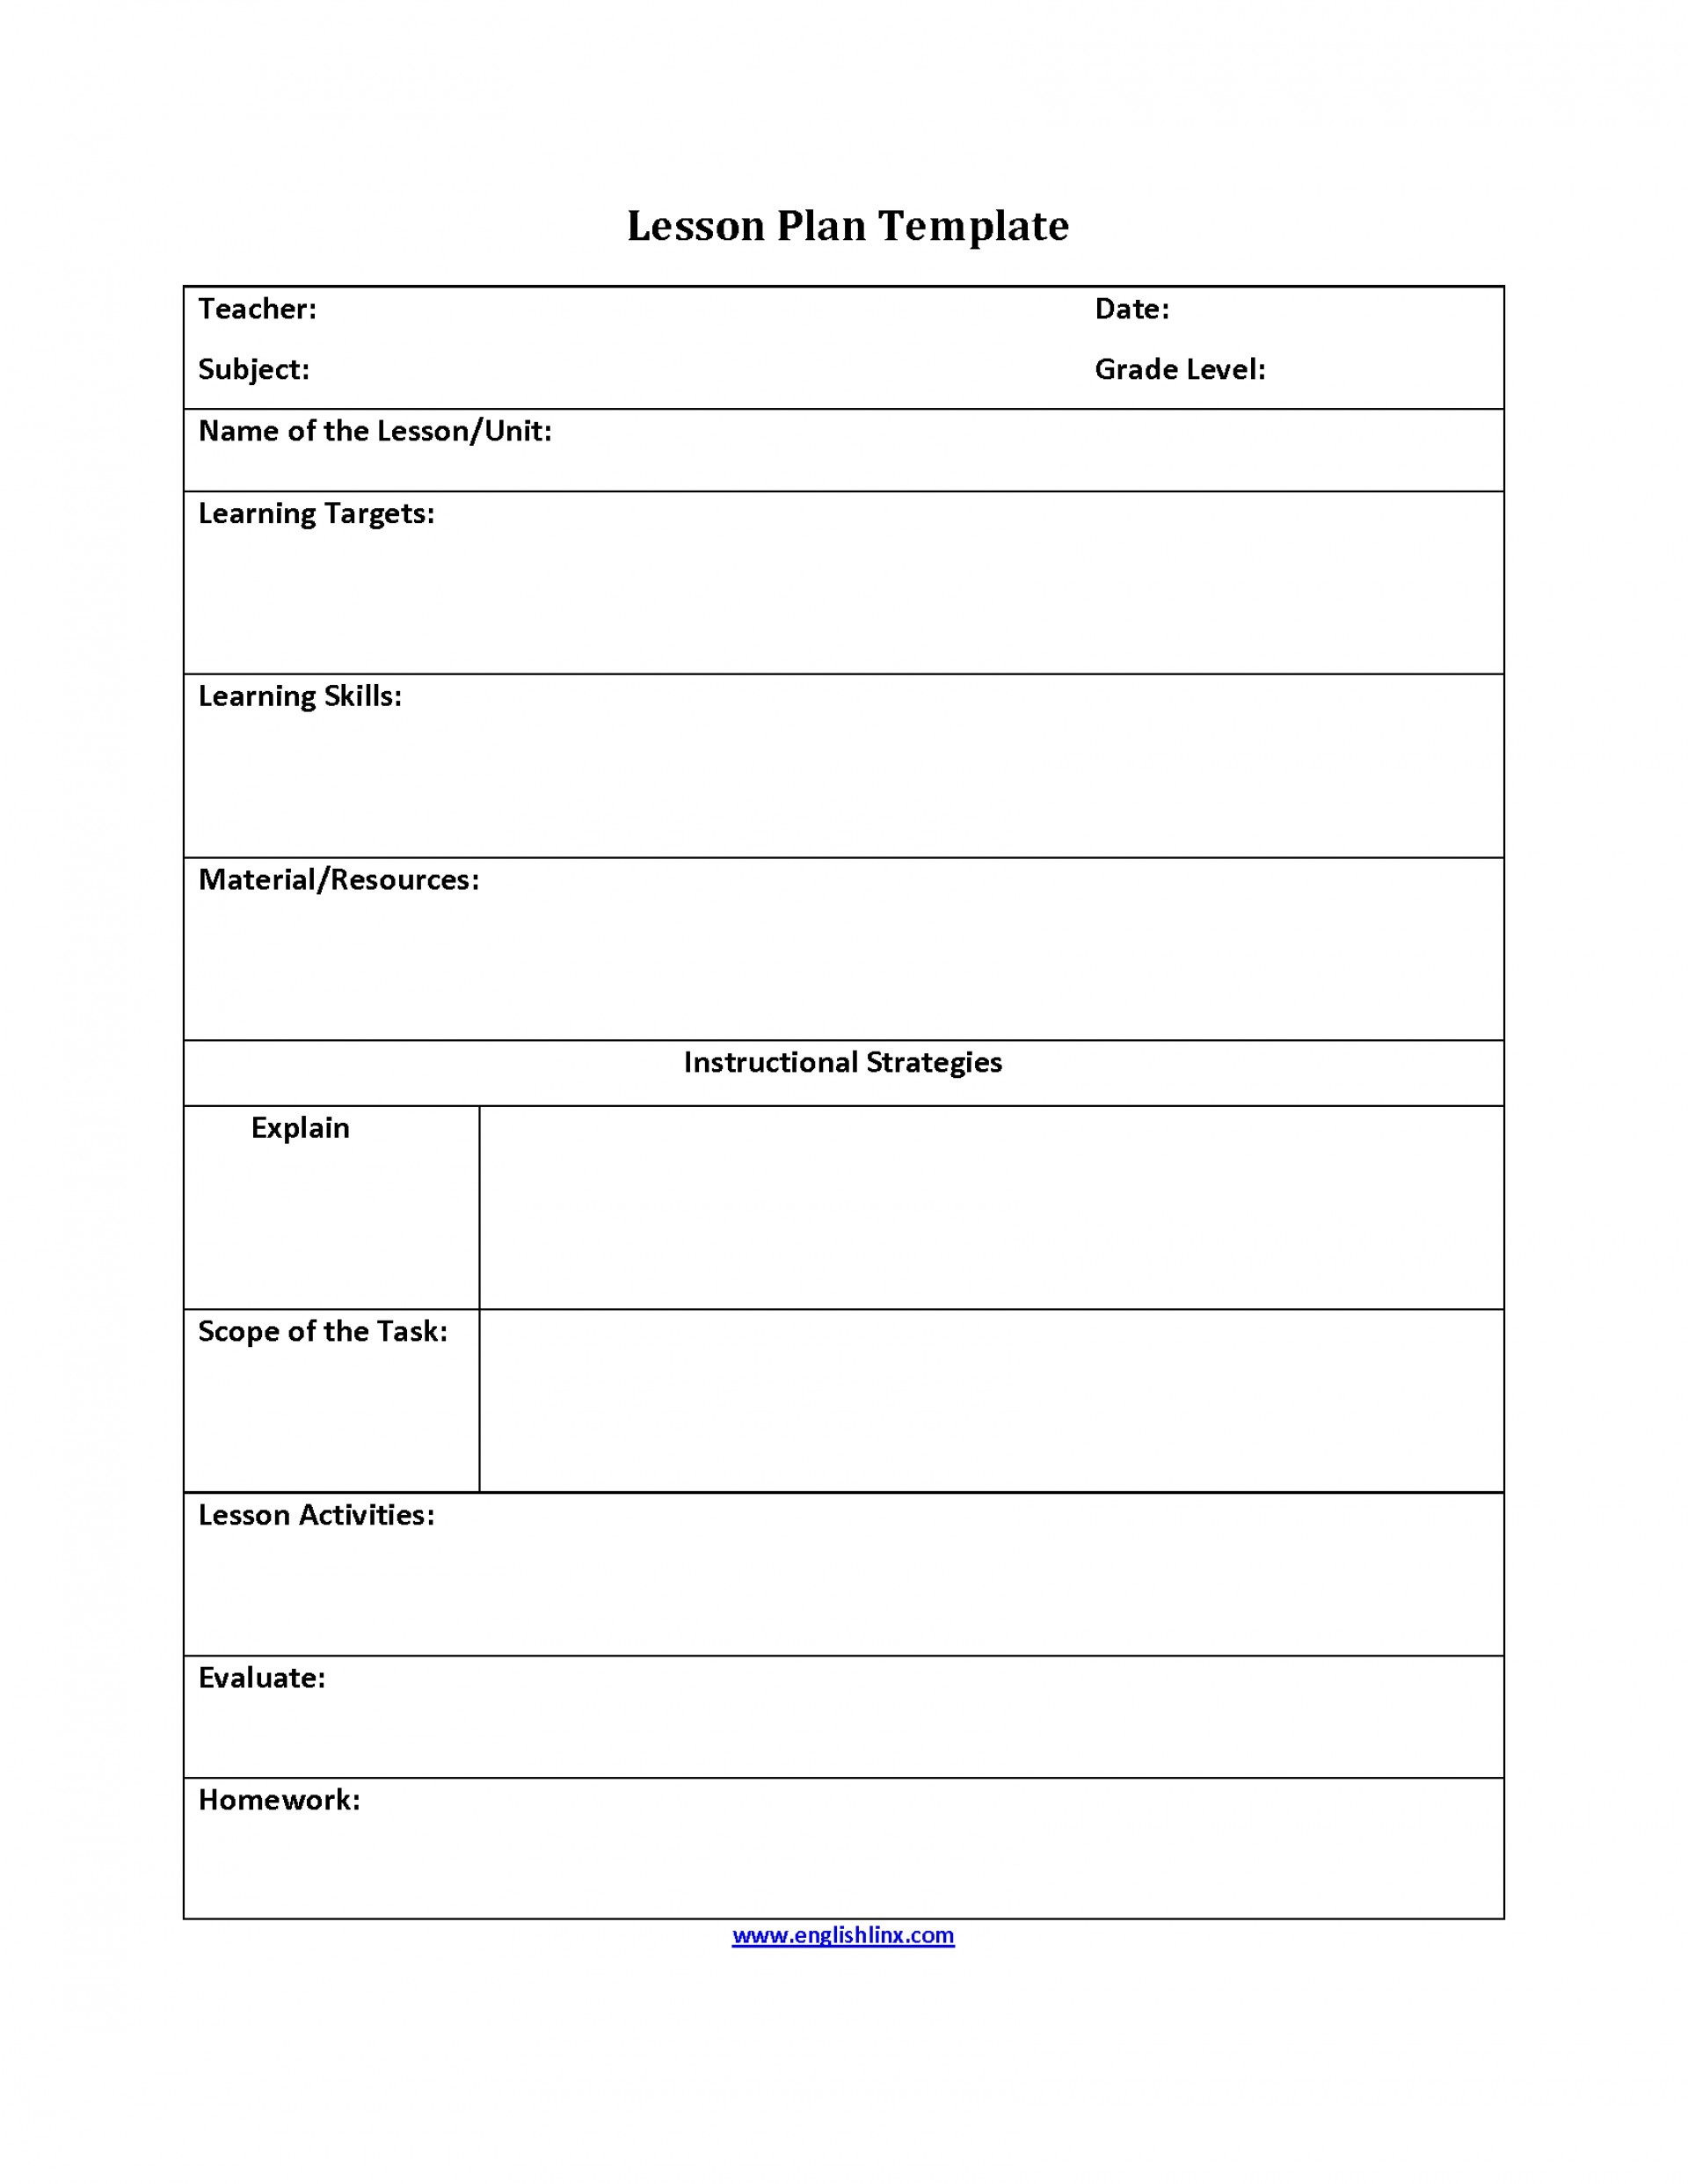 004 Simple Lesson Plan Template Fascinating Ideas Basic Pdf Free pertaining to Basic Lesson Plan Template Printable